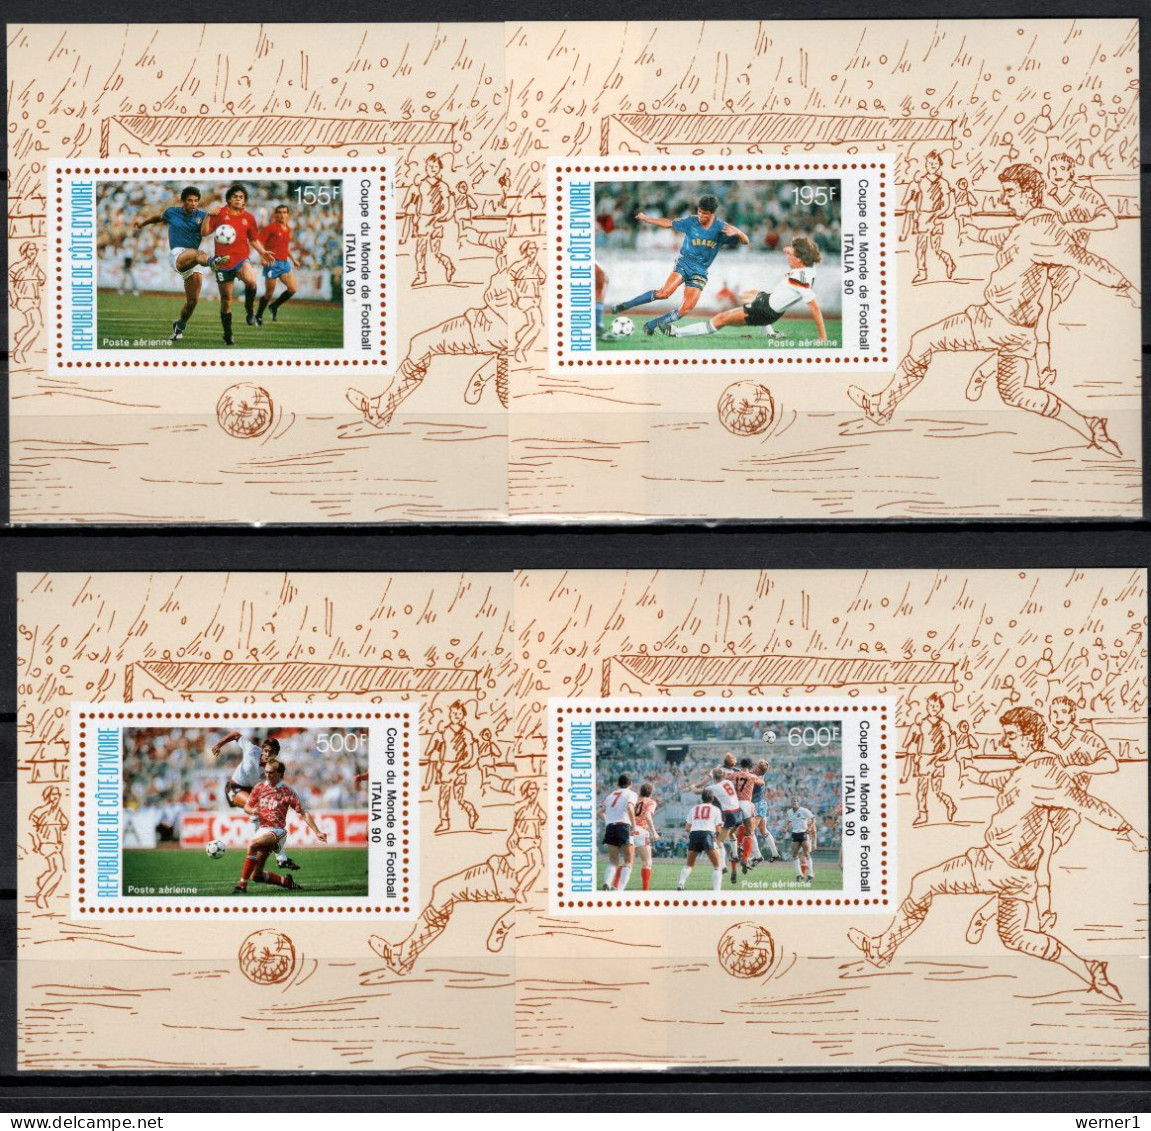 Ivory Coast 1990 Football Soccer World Cup Set Of 4 S/s Imperf. MNH -scarce- - 1990 – Italie